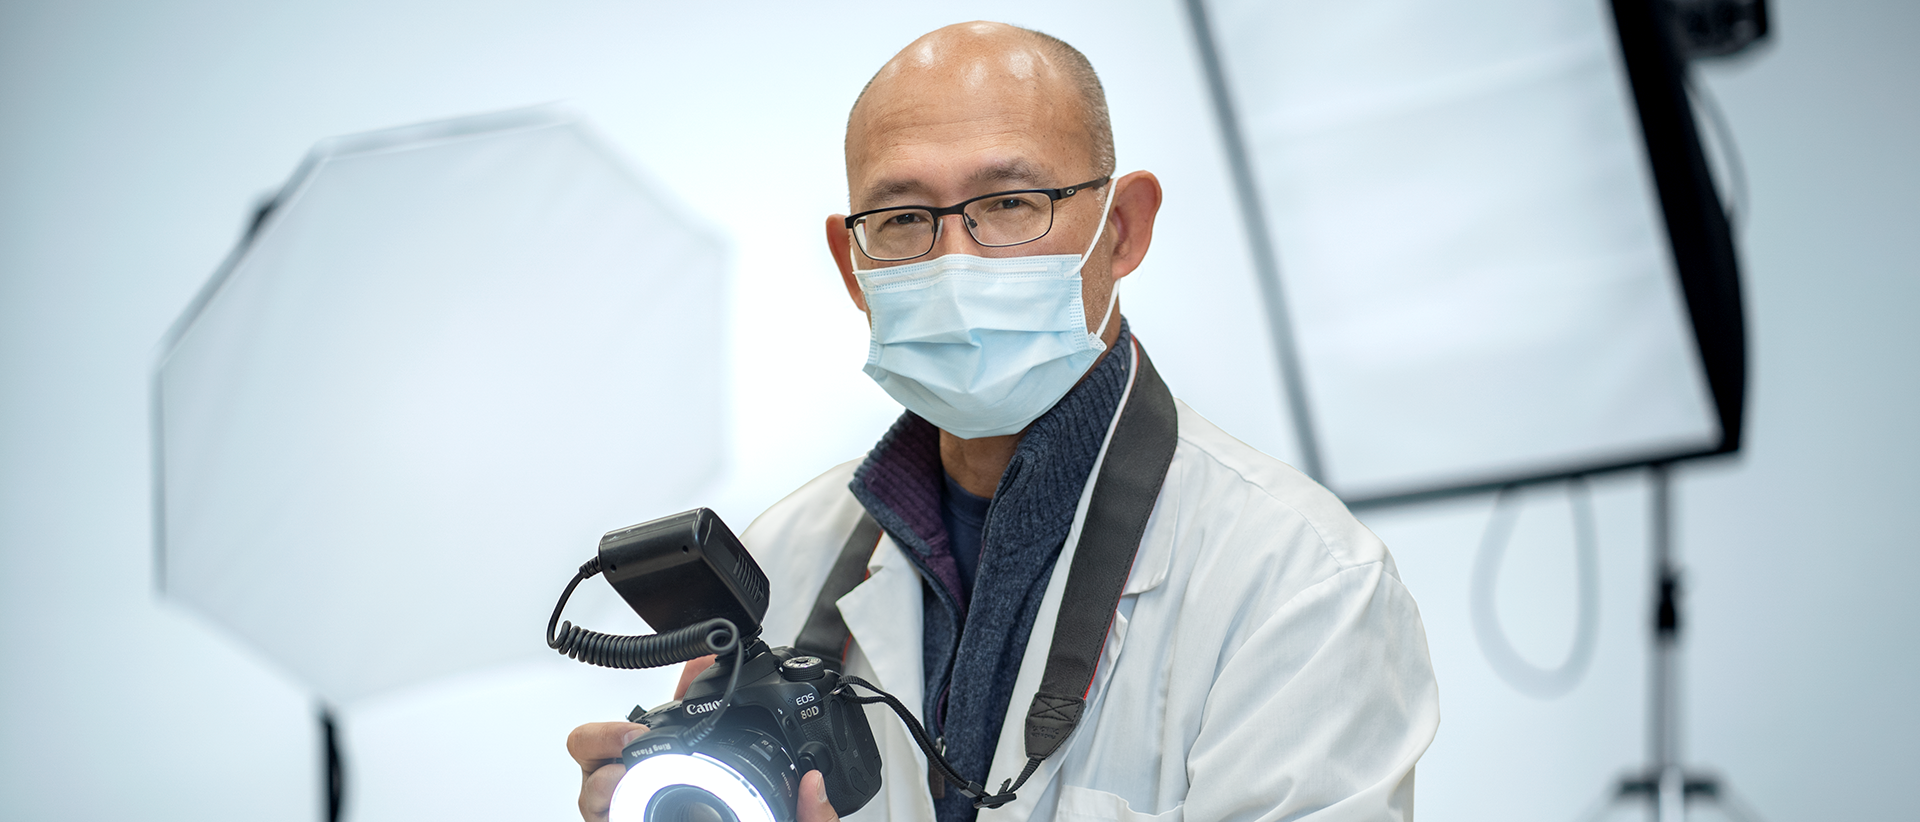 Dodge Baena wearing a mask and white lab coat while holding a camera. He is standing in front of a photoshoot set-up.